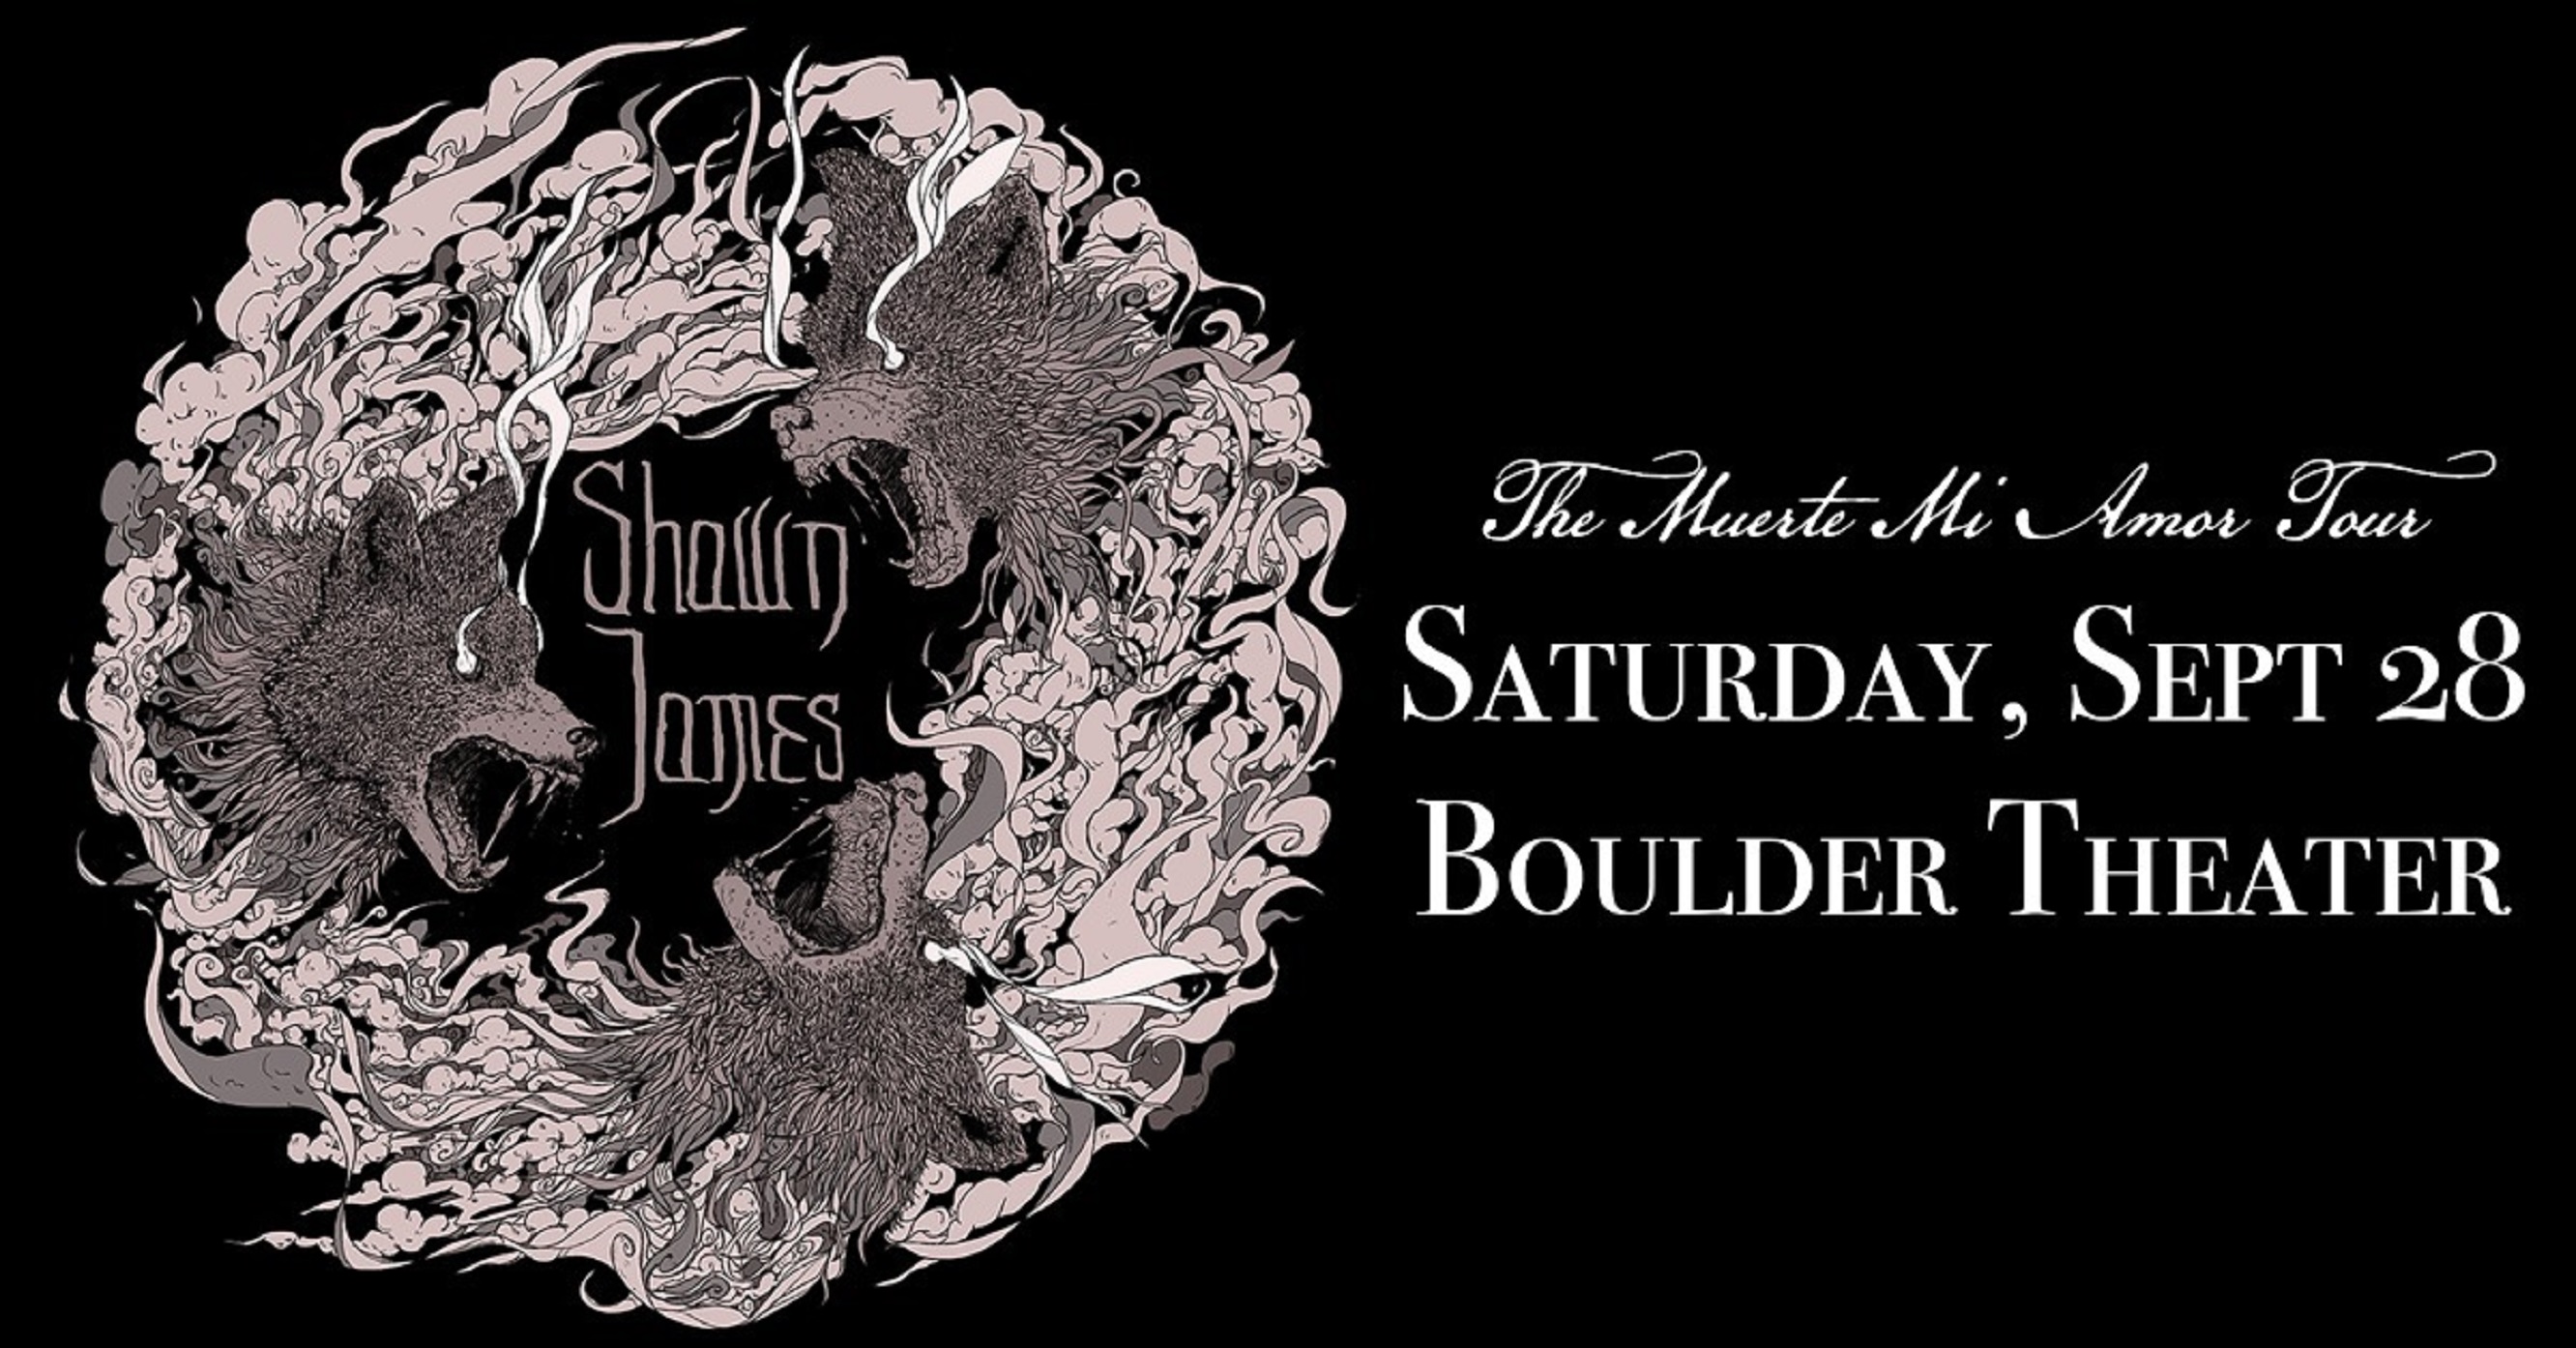 Shawn James Live at Boulder Theater – A Musical Journey You Can't Miss